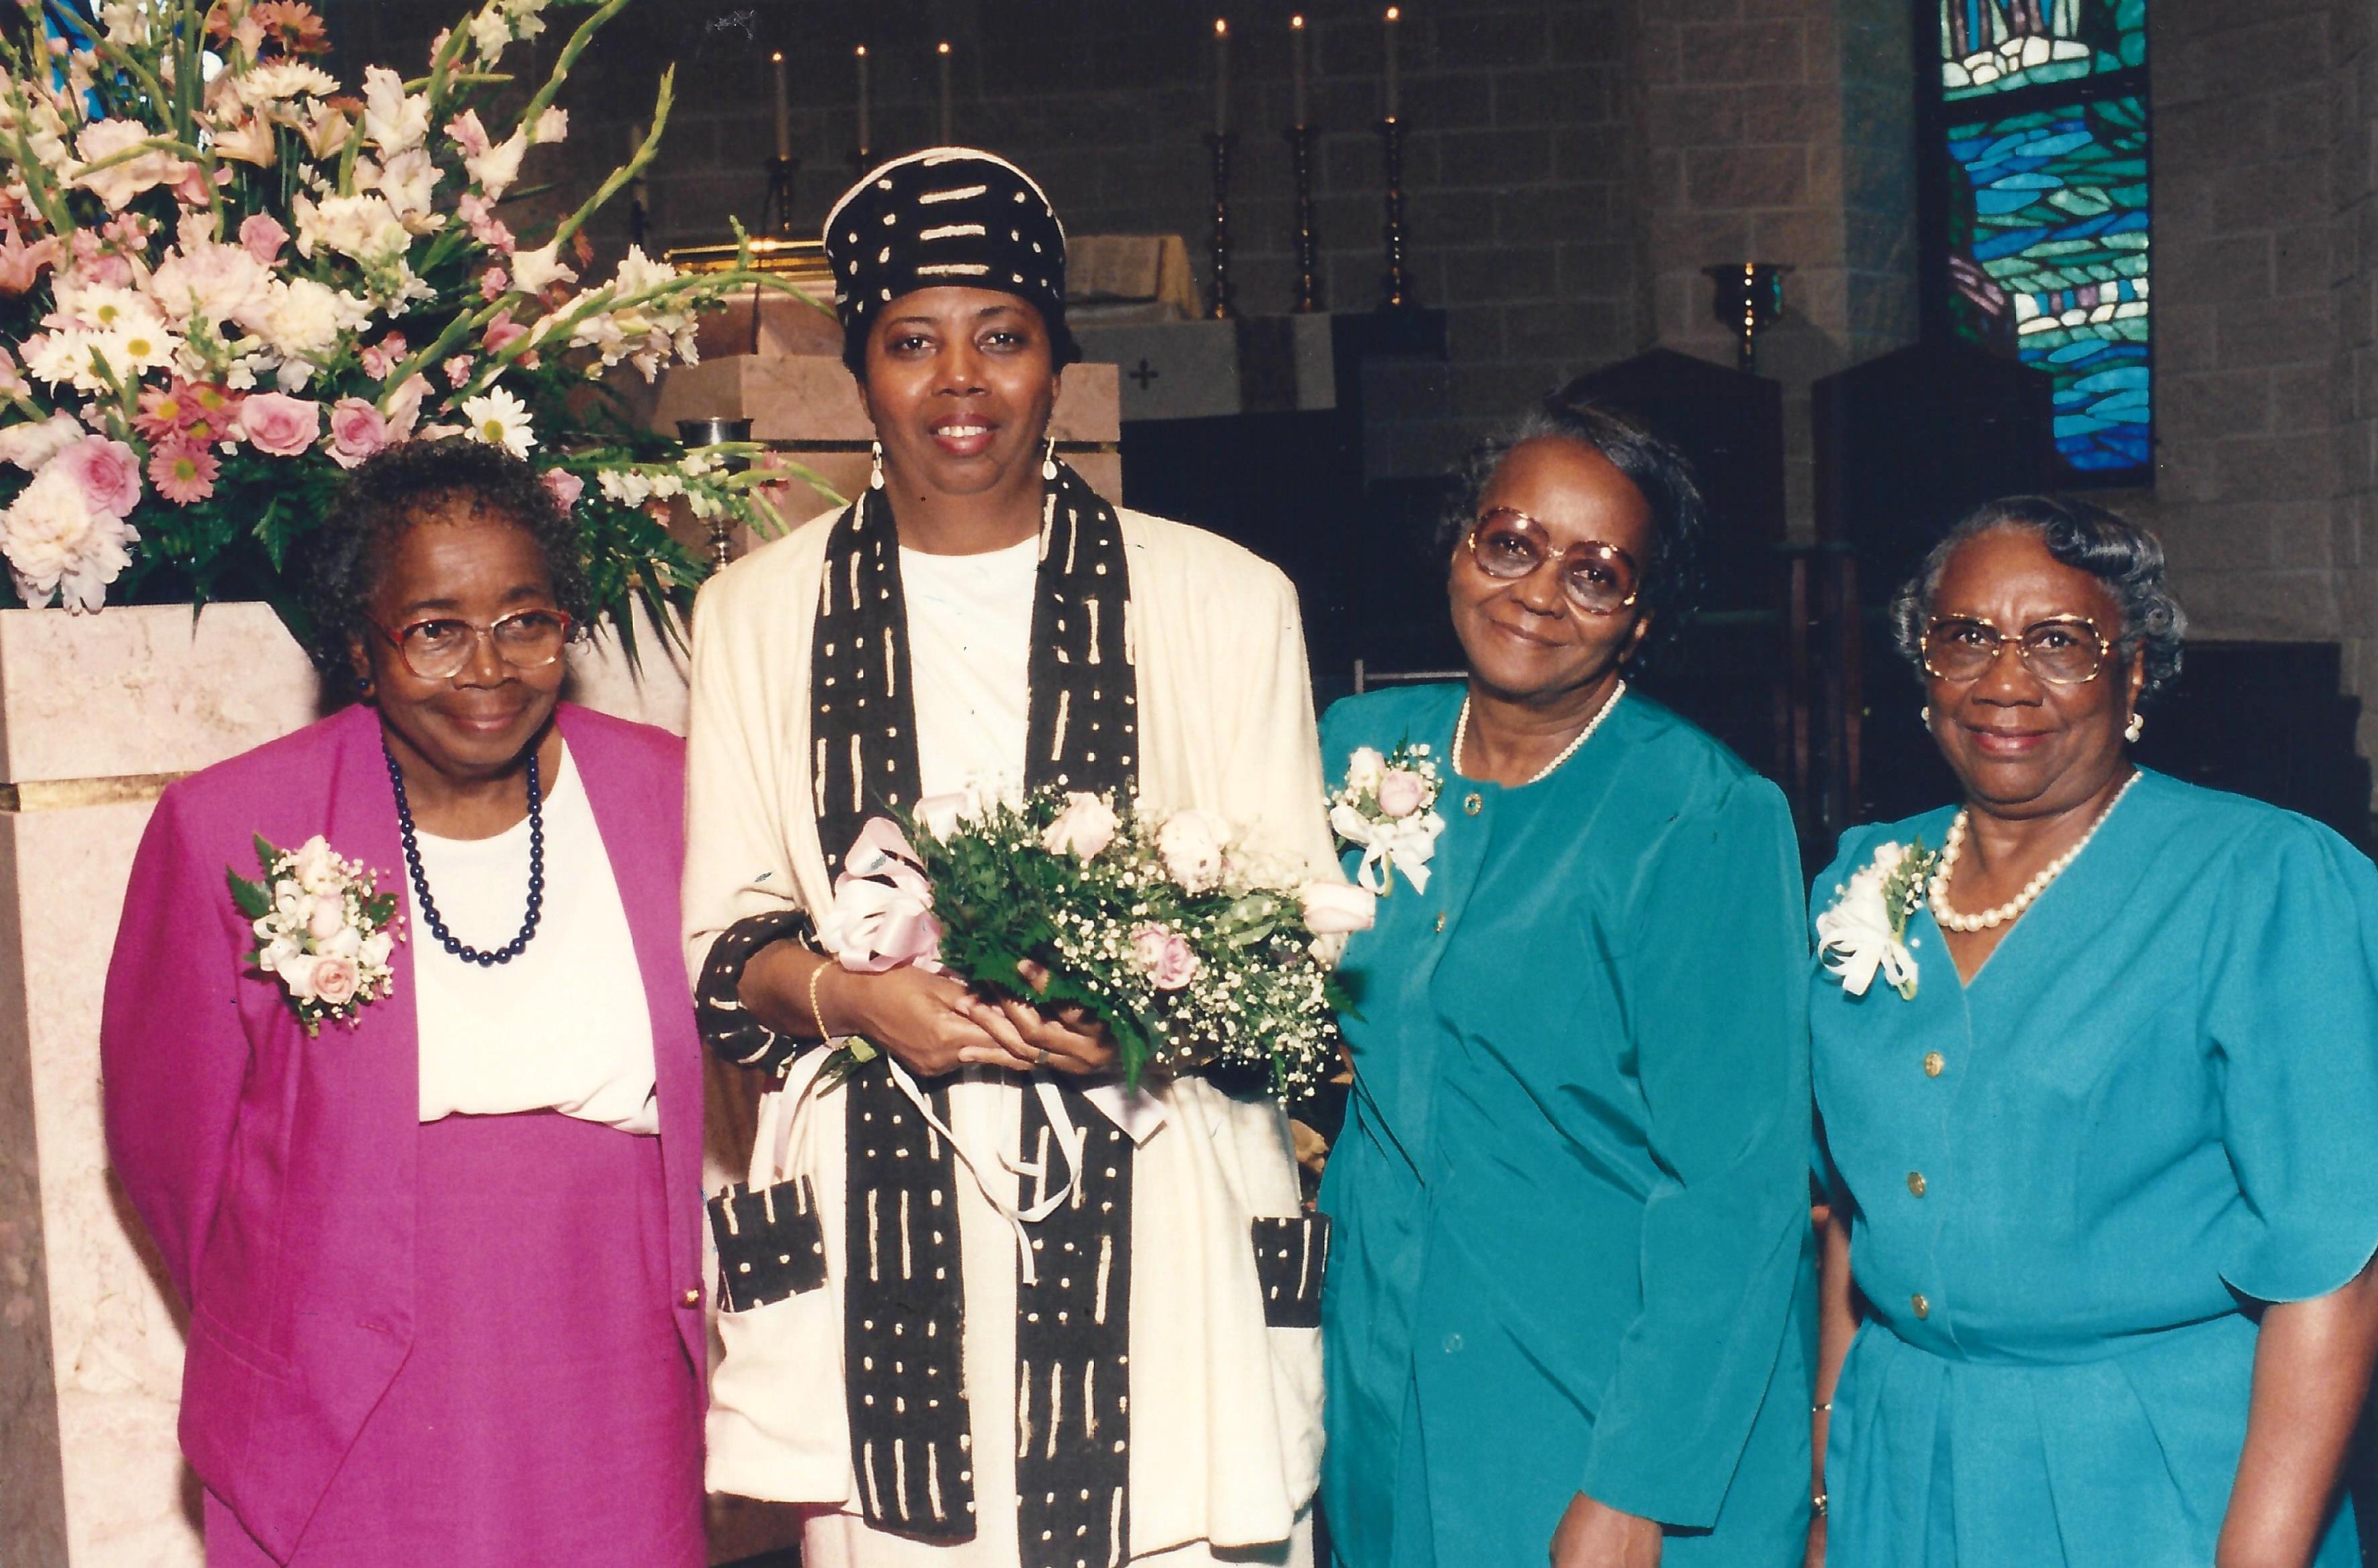 Emma Colquitt-Sayers (second from left) with mother and Aunts at Holy Union, 1995.